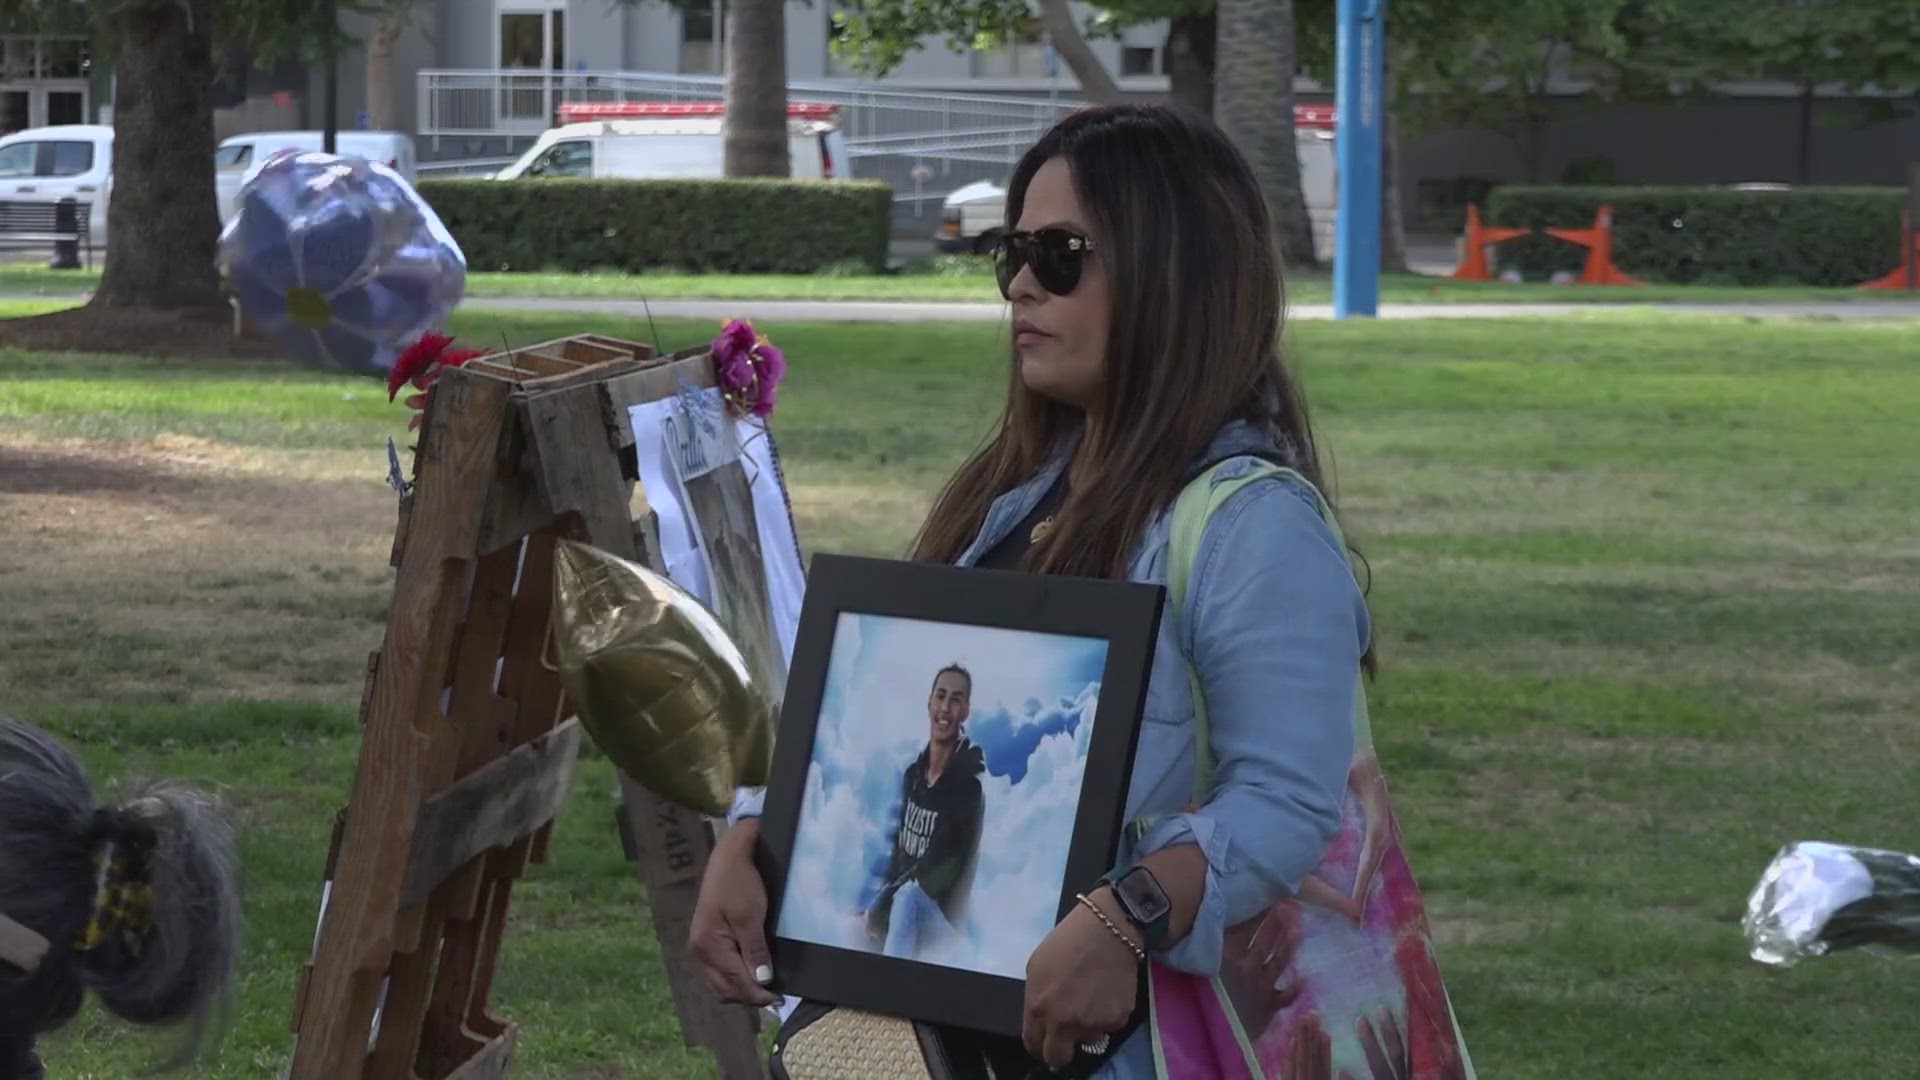 Families gather at State Capitol on National Day of Remembrance for Murder Victims